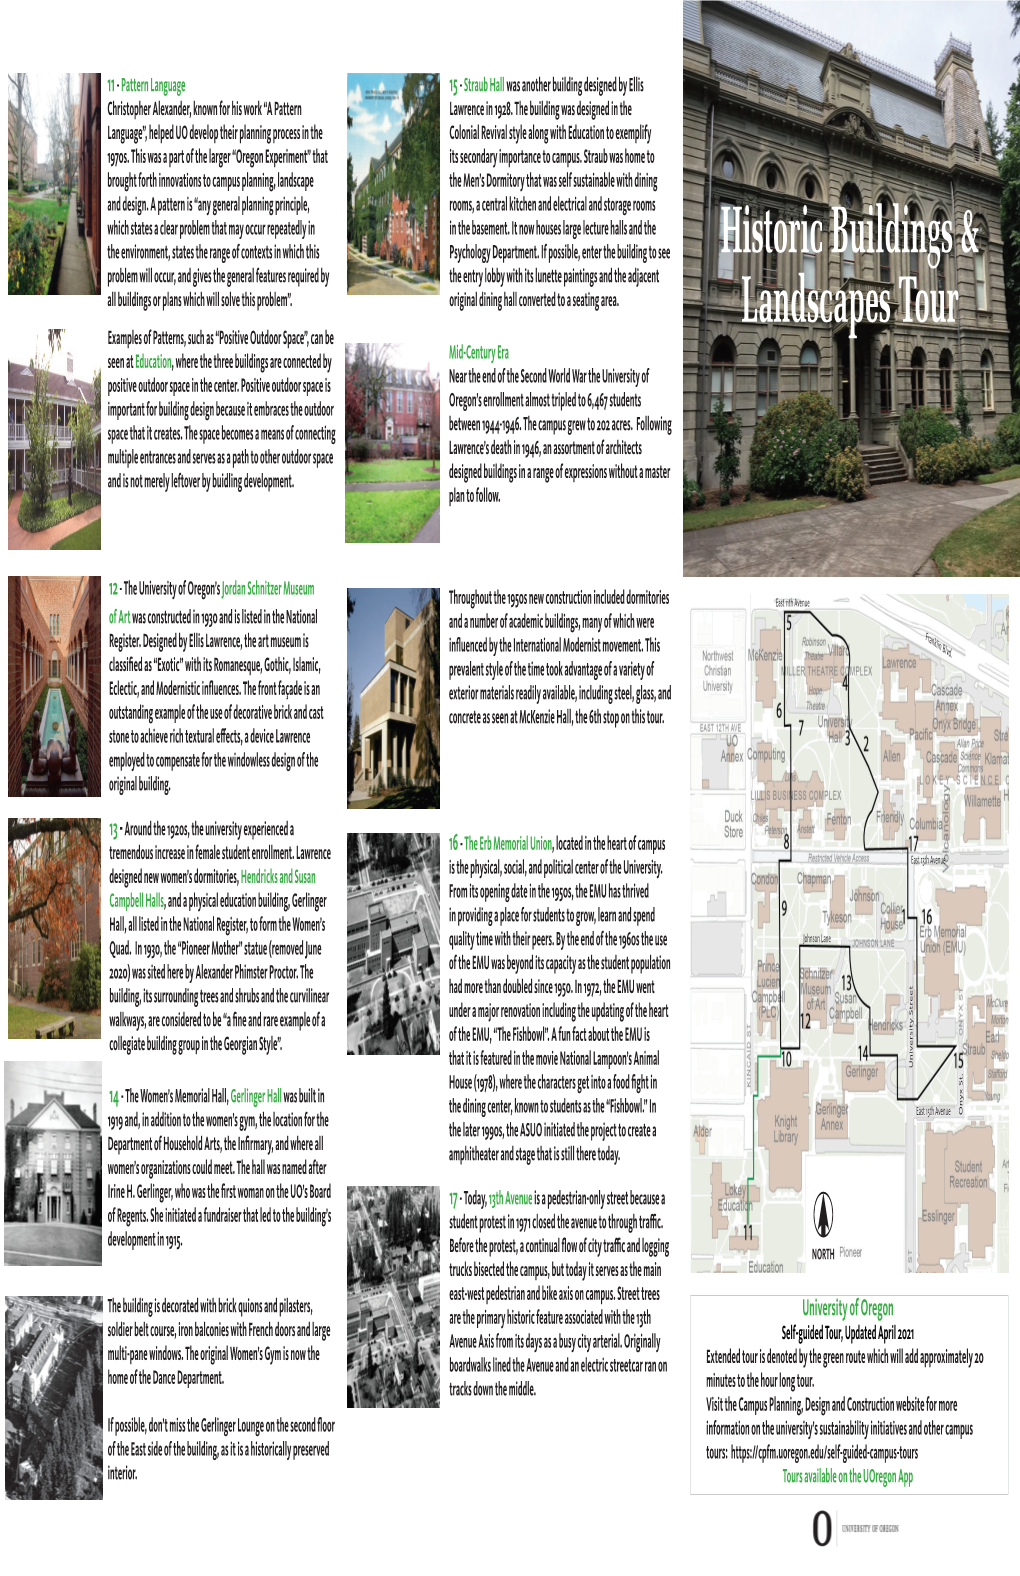 Historic Buildings and Landscapes